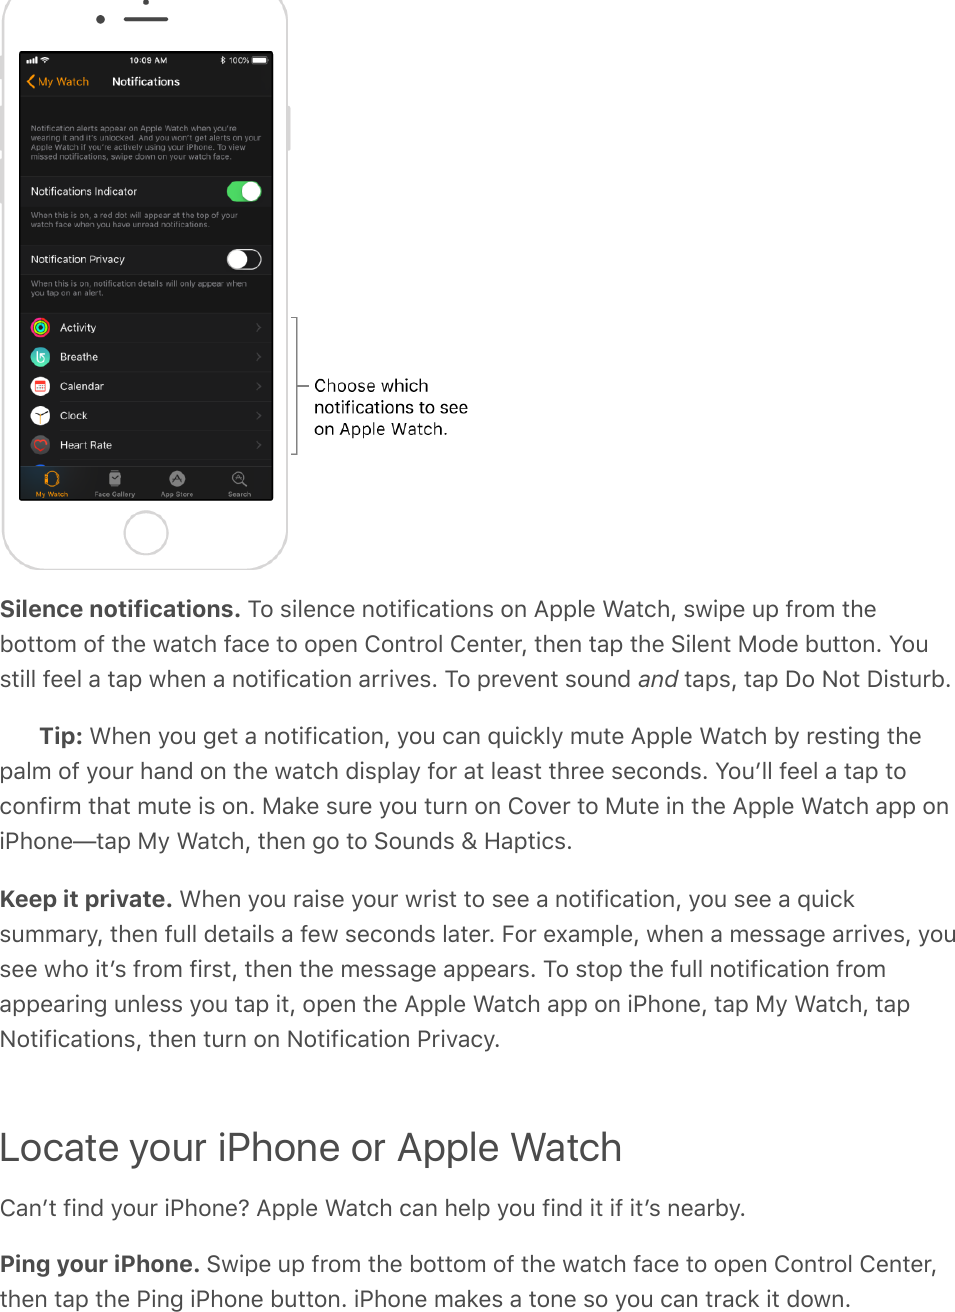 Silence notifications. To silence notifications on Apple Watch, swipe up from thebottom of the watch face to open Control Center, then tap the Silent Mode button. Youstill feel a tap when a notification arrives. To prevent sound and taps, tap Do Not Disturb.Tip: When you get a notification, you can quickly mute Apple Watch by resting thepalm of your hand on the watch display for at least three seconds. Youʼll feel a tap toconfirm that mute is on. Make sure you turn on Cover to Mute in the Apple Watch app oniPhone—tap My Watch, then go to Sounds &amp; Haptics.Keep it private. When you raise your wrist to see a notification, you see a quicksummary, then full details a few seconds later. For example, when a message arrives, yousee who itʼs from first, then the message appears. To stop the full notification fromappearing unless you tap it, open the Apple Watch app on iPhone, tap My Watch, tapNotifications, then turn on Notification Privacy.Locate your iPhone or Apple WatchCanʼt find your iPhone? Apple Watch can help you find it if itʼs nearby.Ping your iPhone. Swipe up from the bottom of the watch face to open Control Center,then tap the Ping iPhone button. iPhone makes a tone so you can track it down.